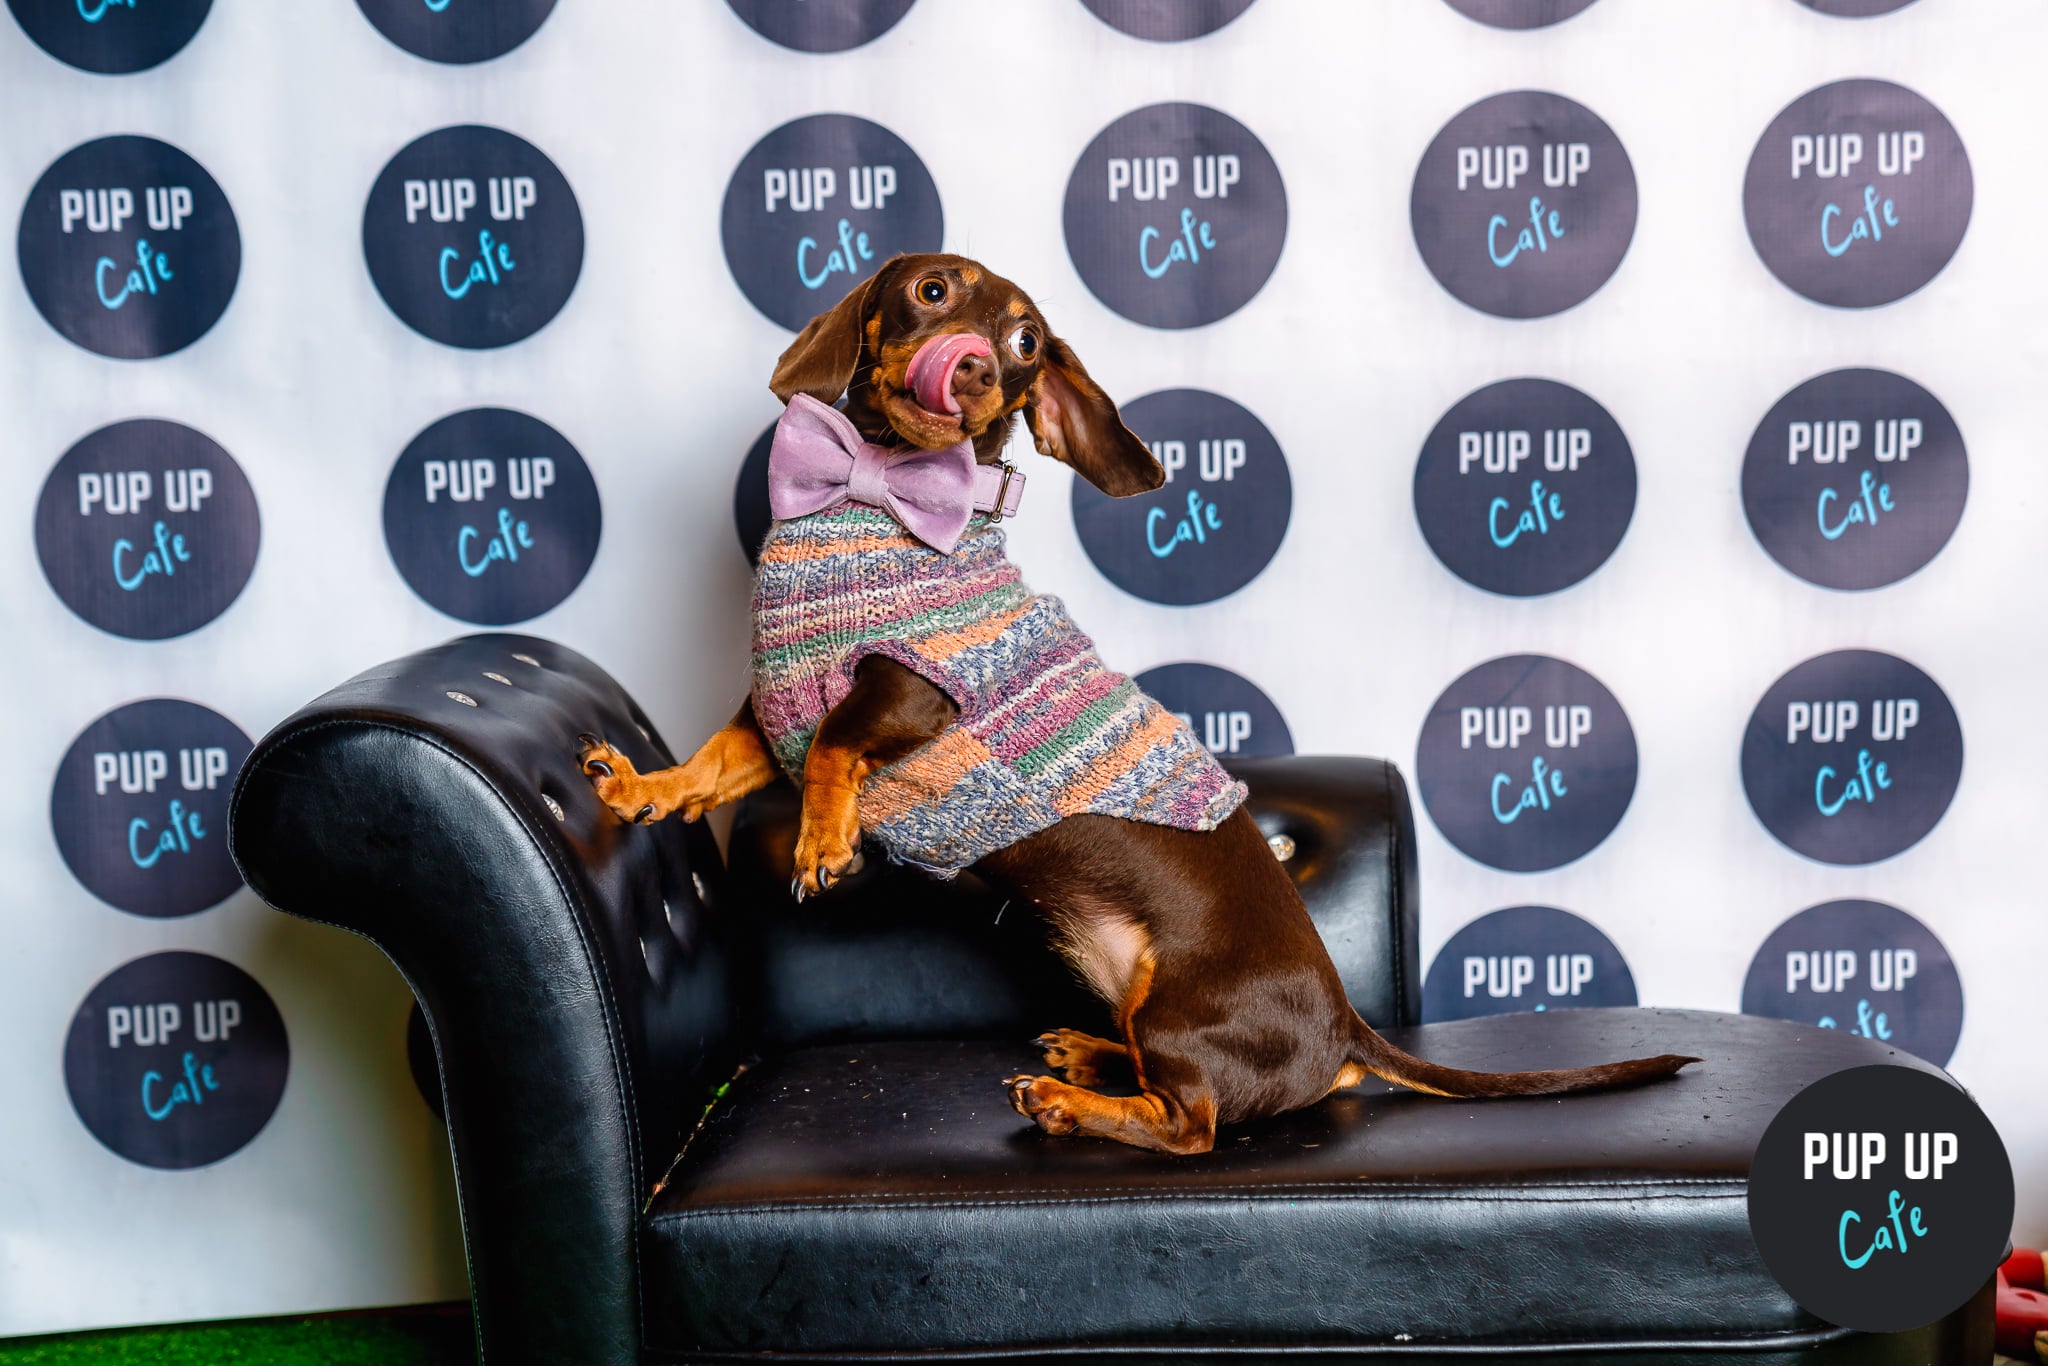 A sausage dog poses at the Pup Up Cafe photoshoot on a mini dog sofa